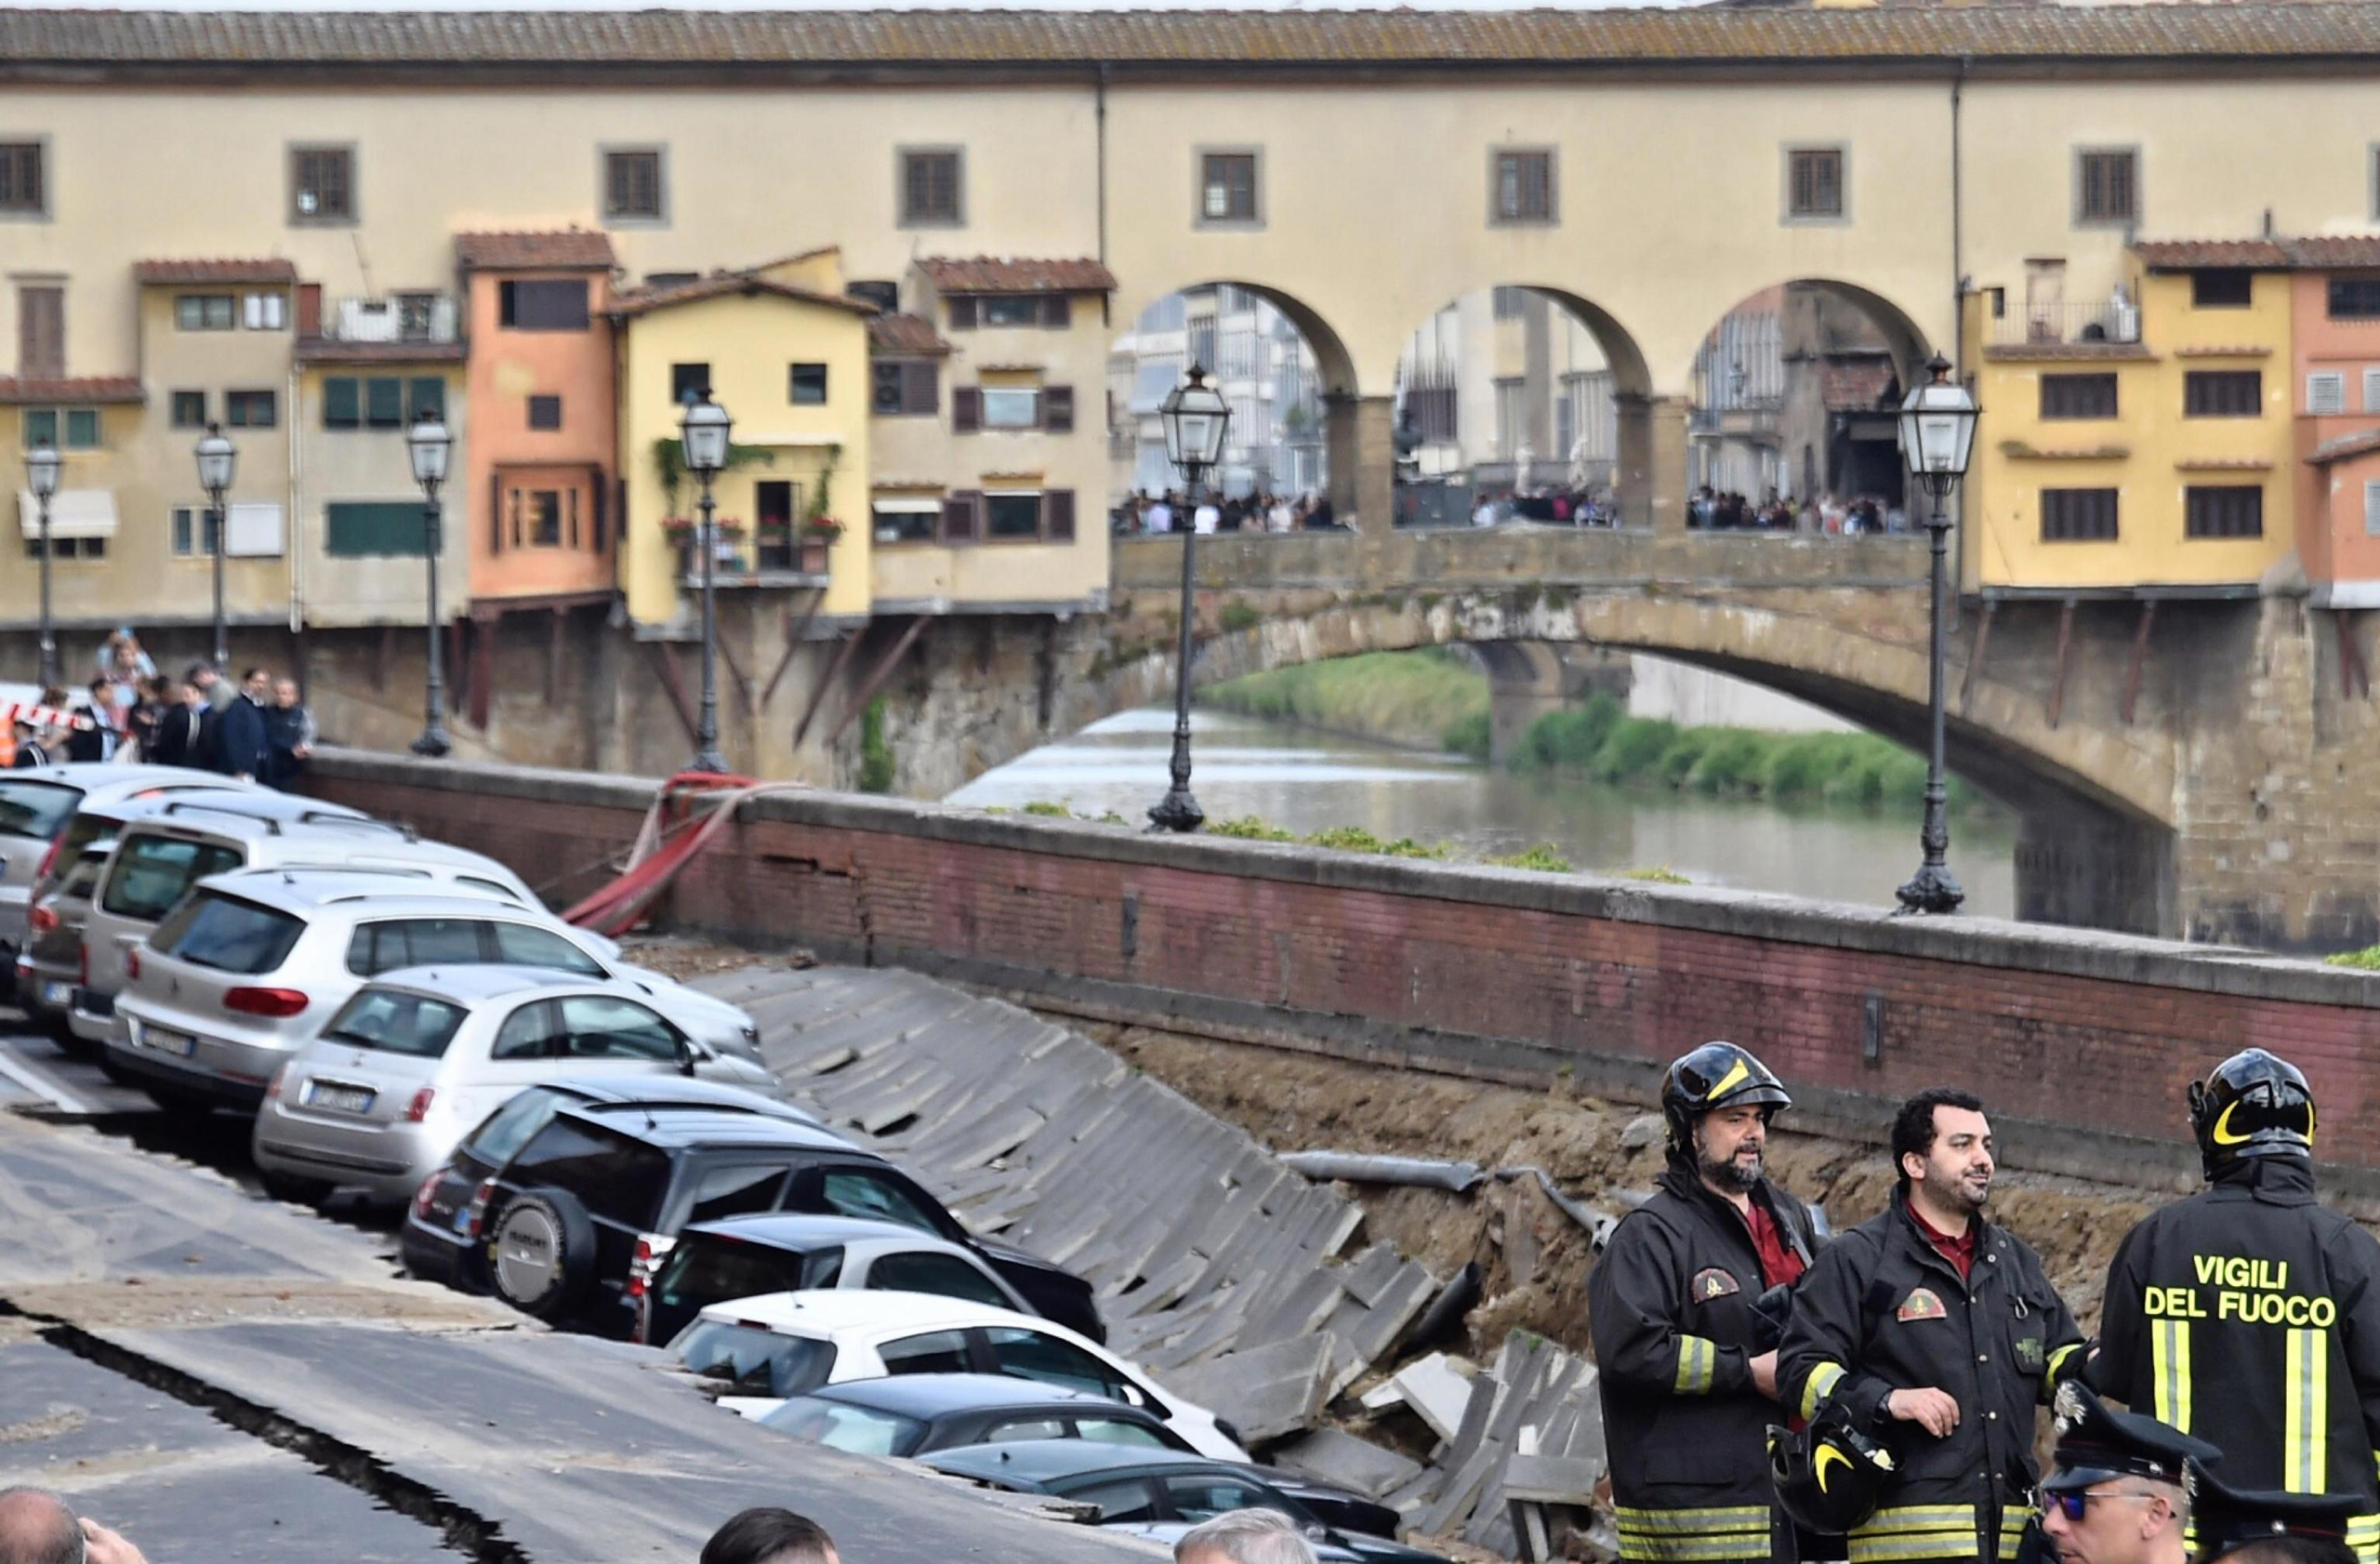 Firefighters standby by cars engulfed by a chasm which opened along Arno river near the Ponte Vecchio Old Bridge in Florence, Italy, on May 25, 2016. (Maurizio degl'Innocenti—ANSA/AP)